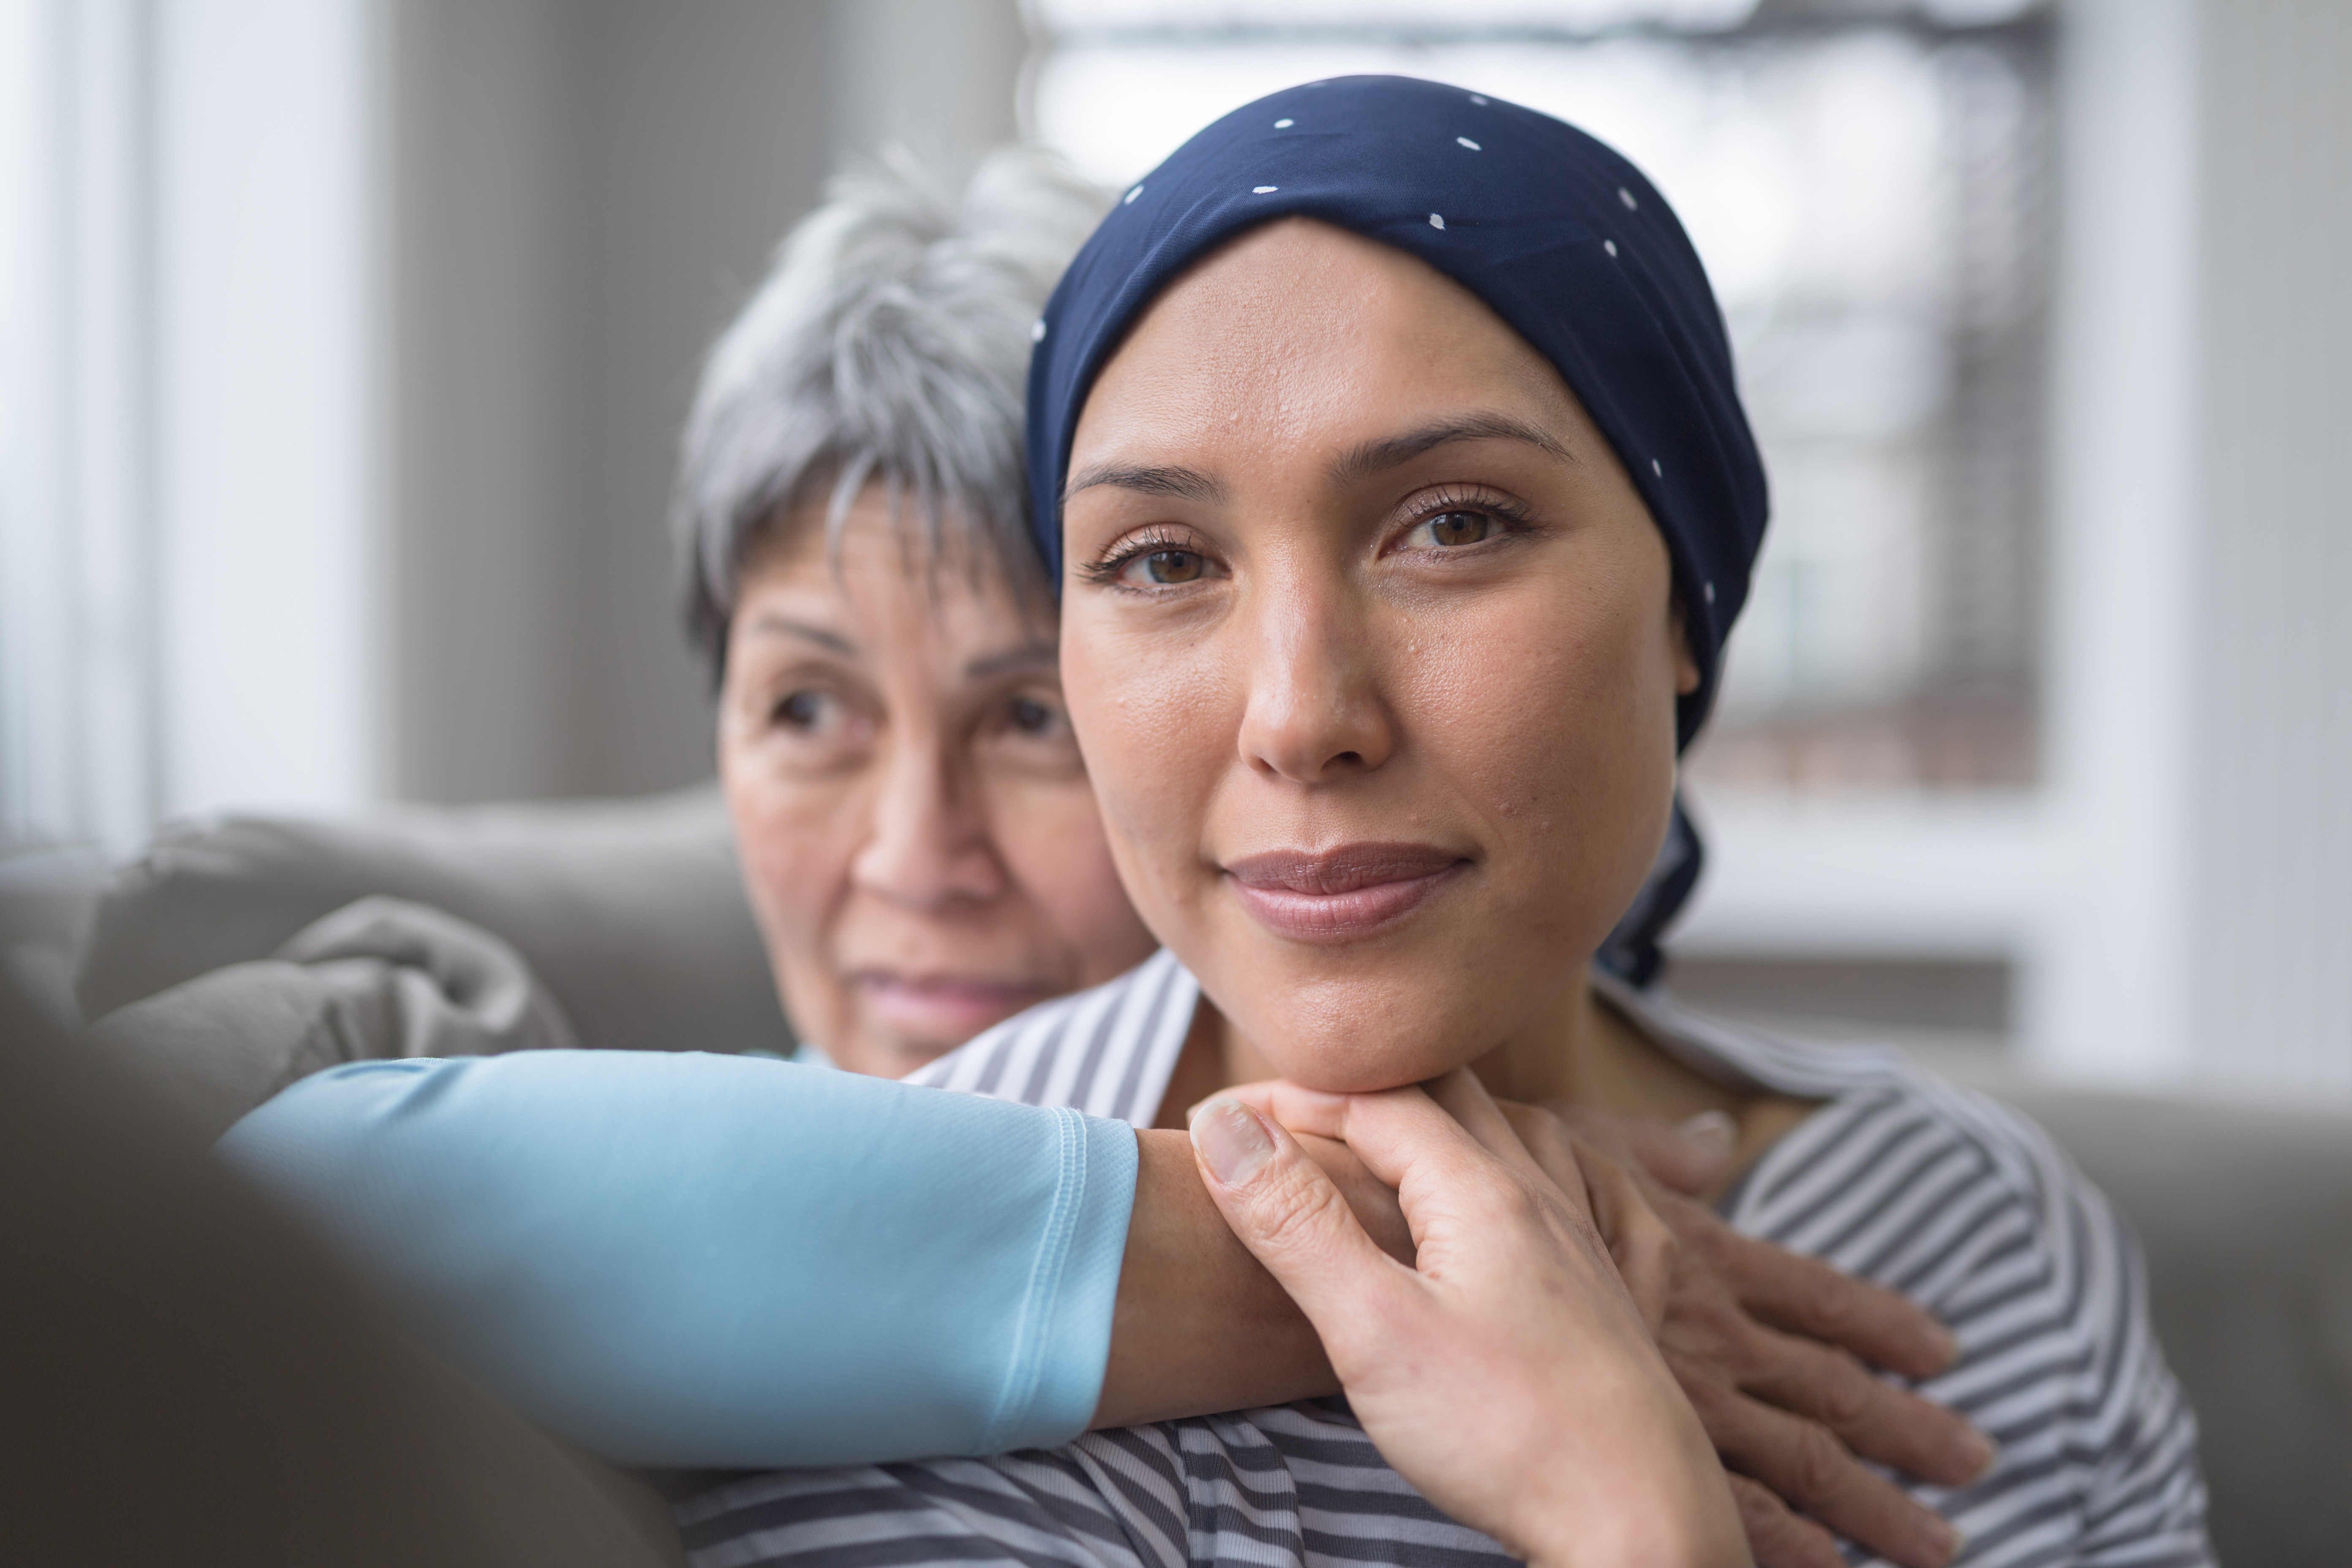 Image of older Asian woman embracing younger woman battling cancer